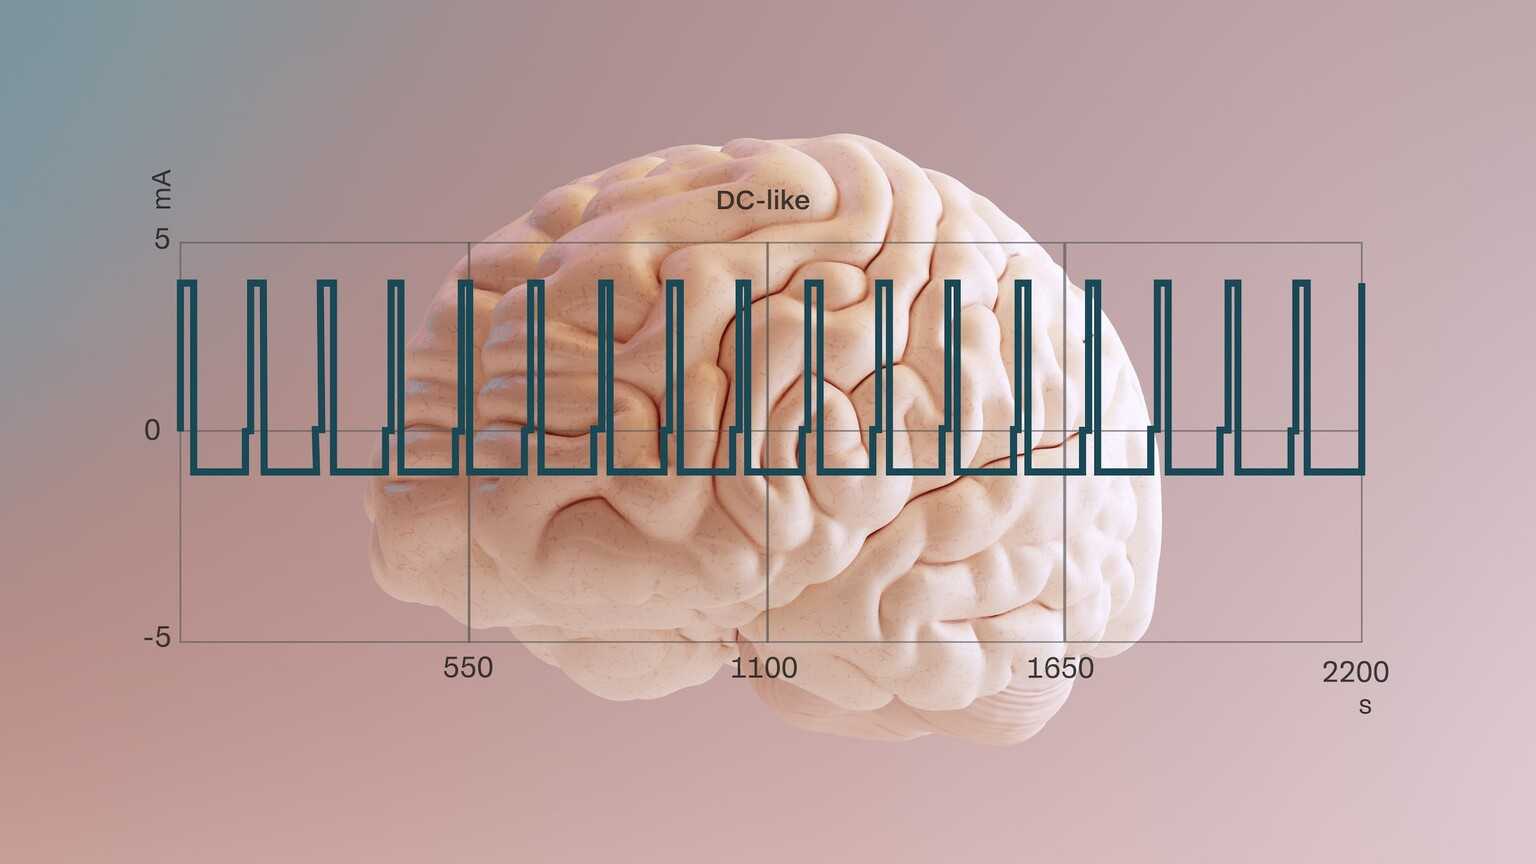 DC-like pulses for neuromodulation